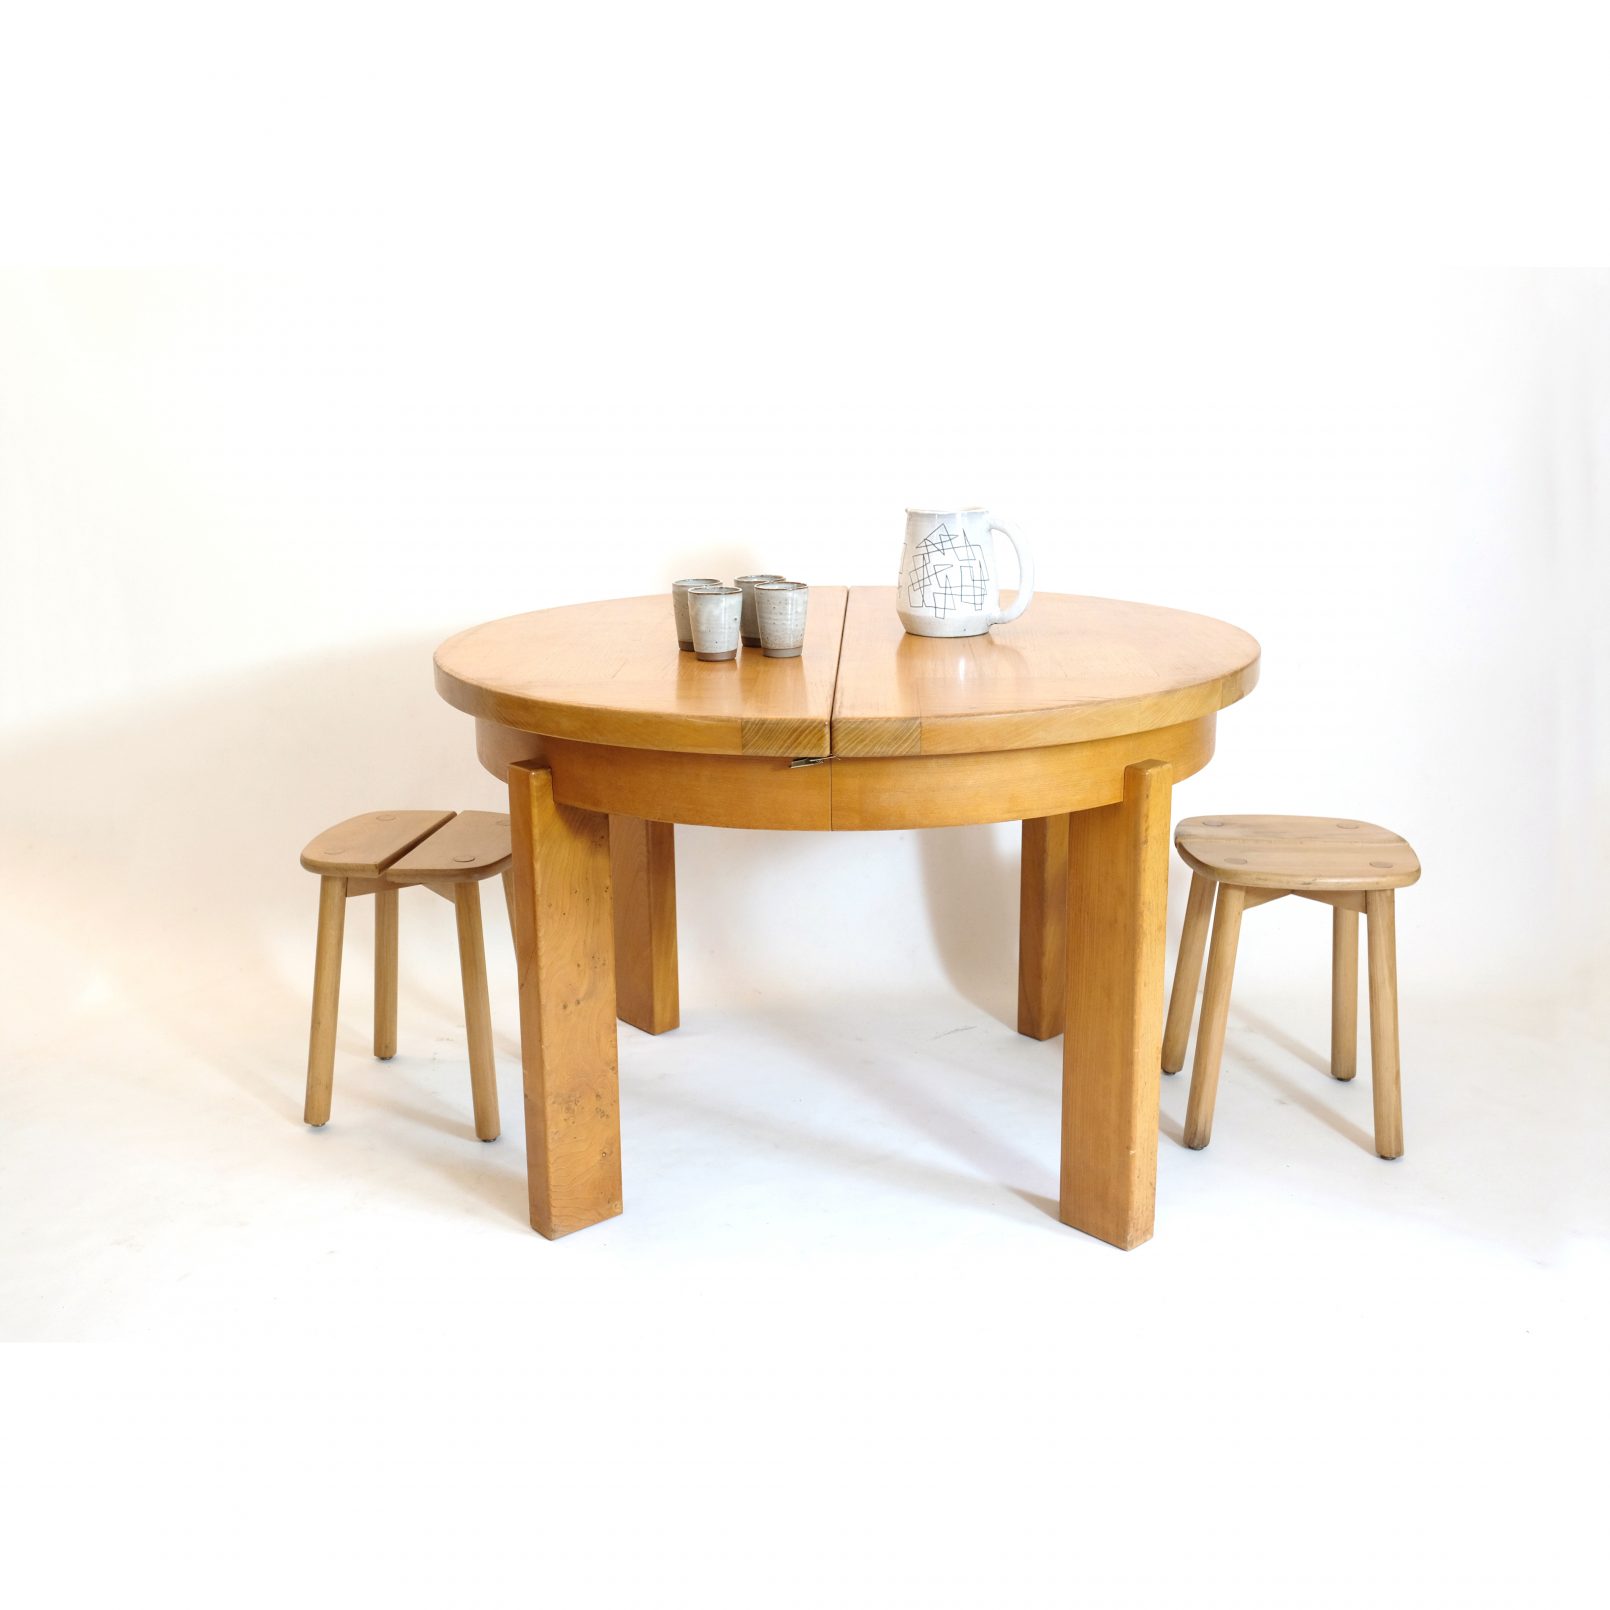 Maison Regain, dining table with an extending leaf, 1970s.